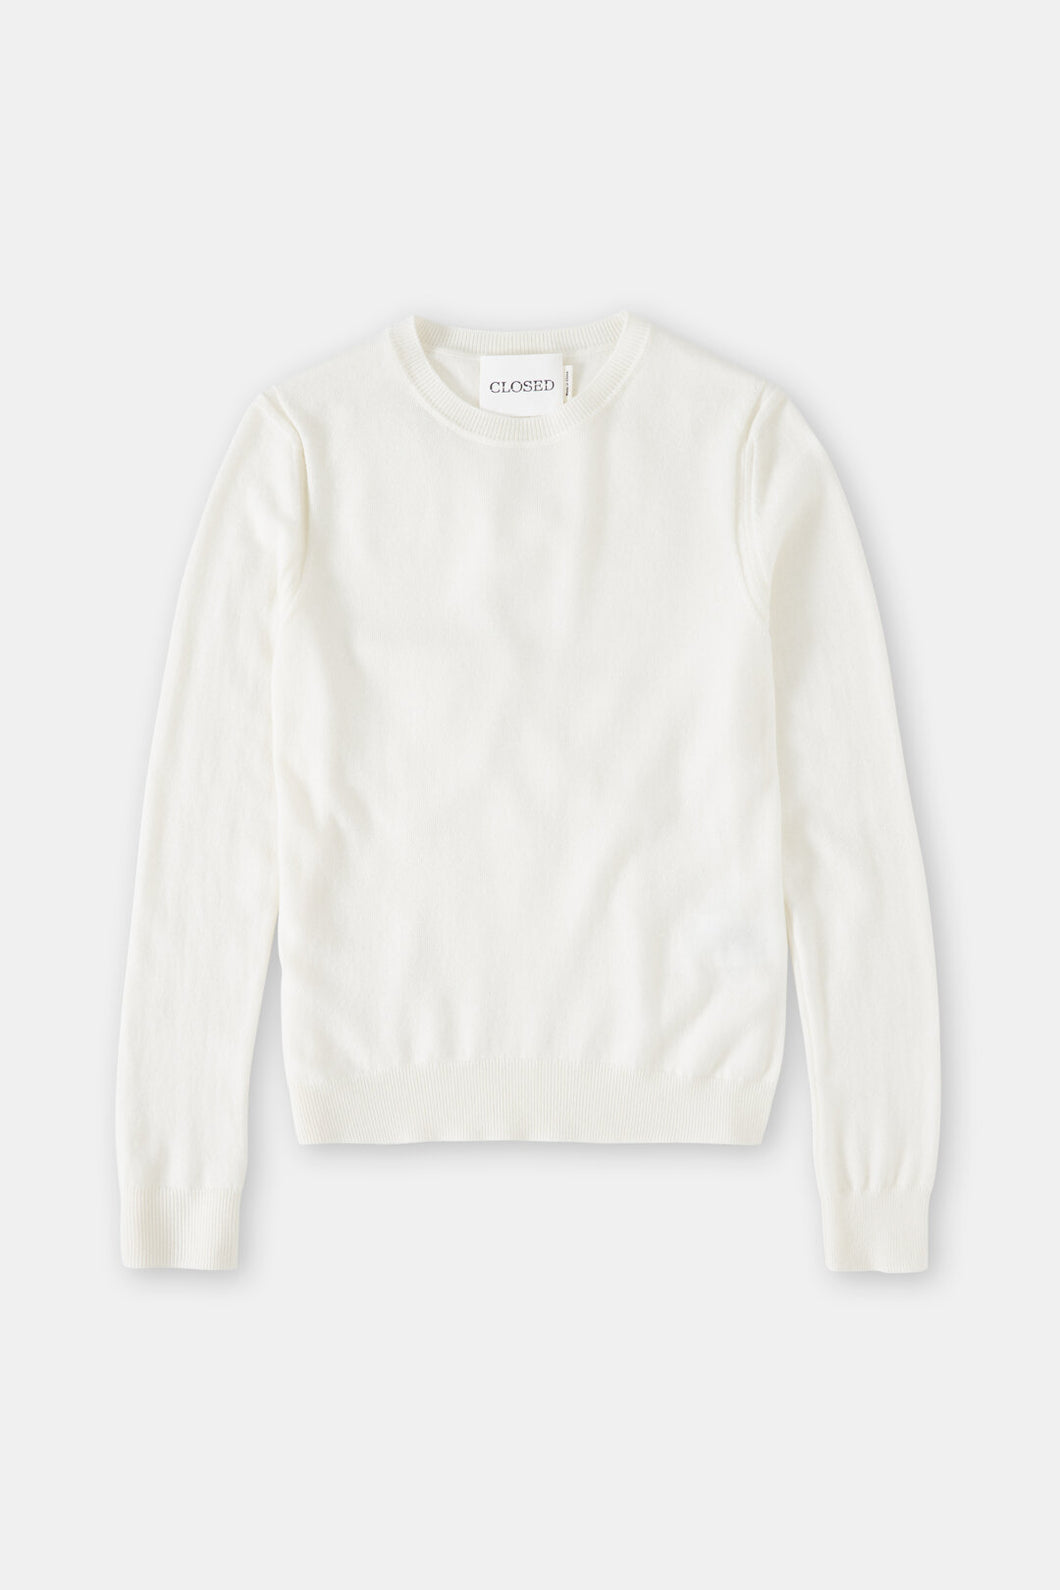 Closed Cashmere-Mix Pullover